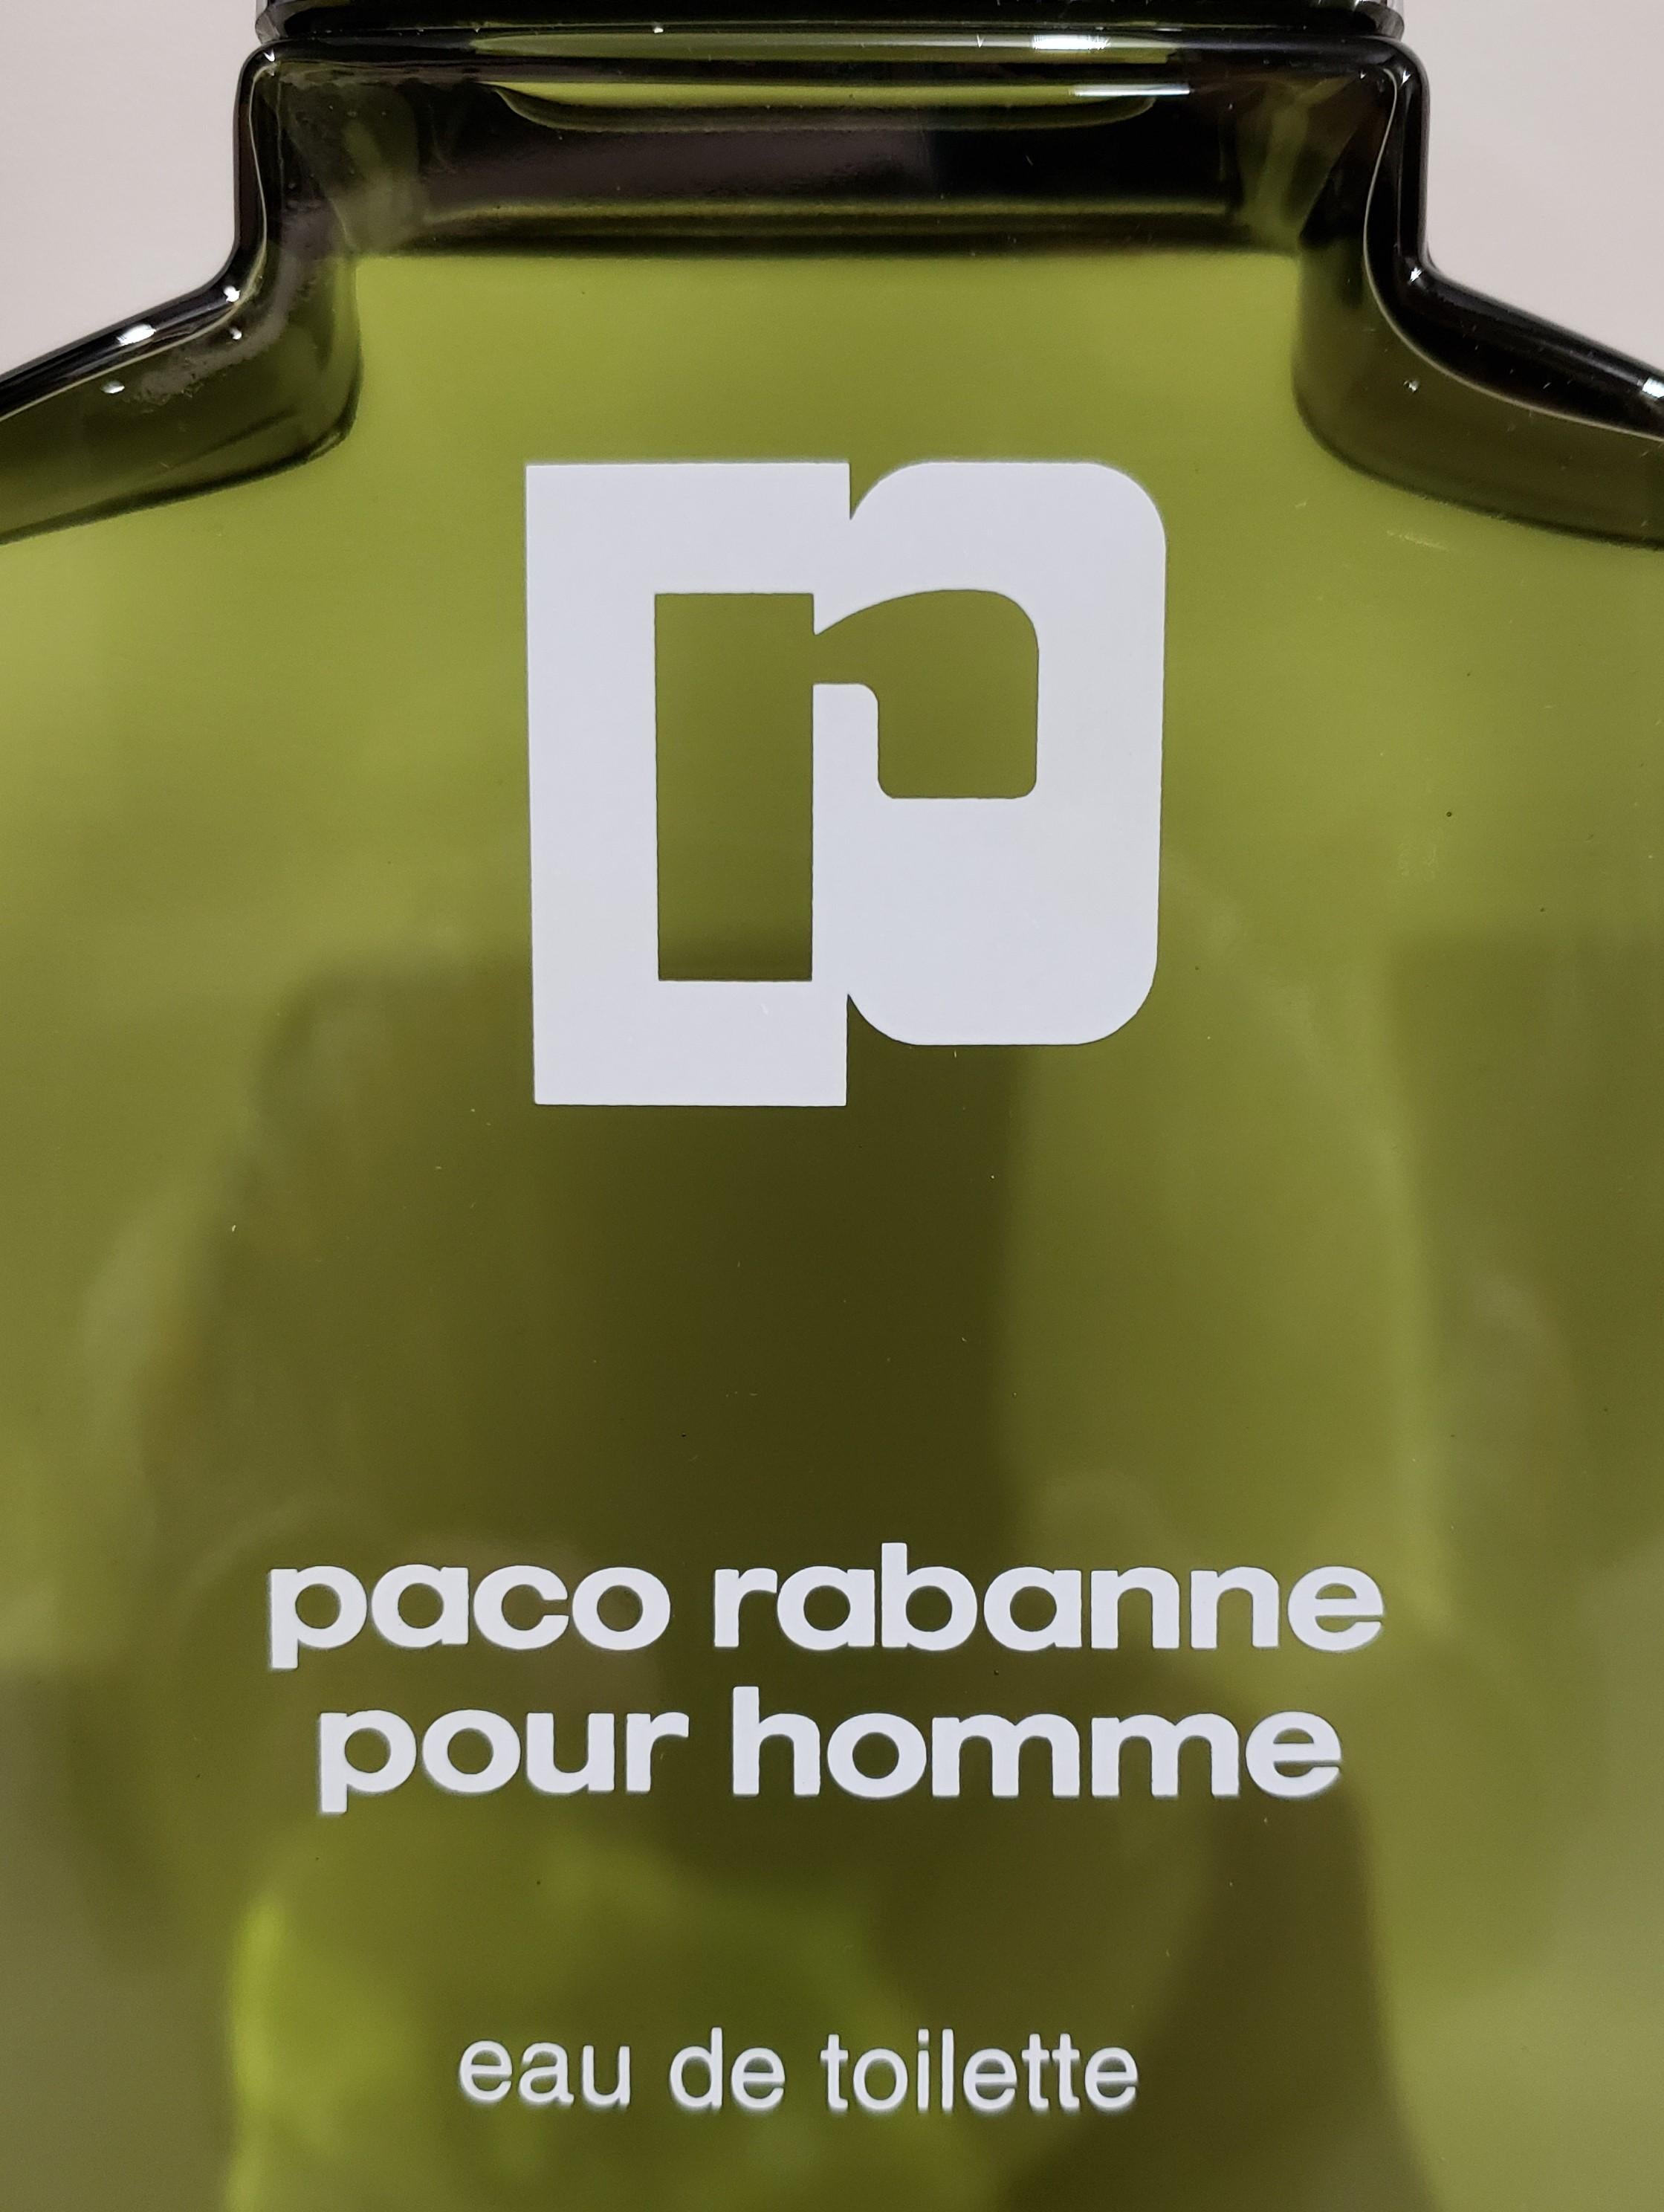 Paco Rabanne store display factice perfume bottle. Does not contain fragrance and used for display only.